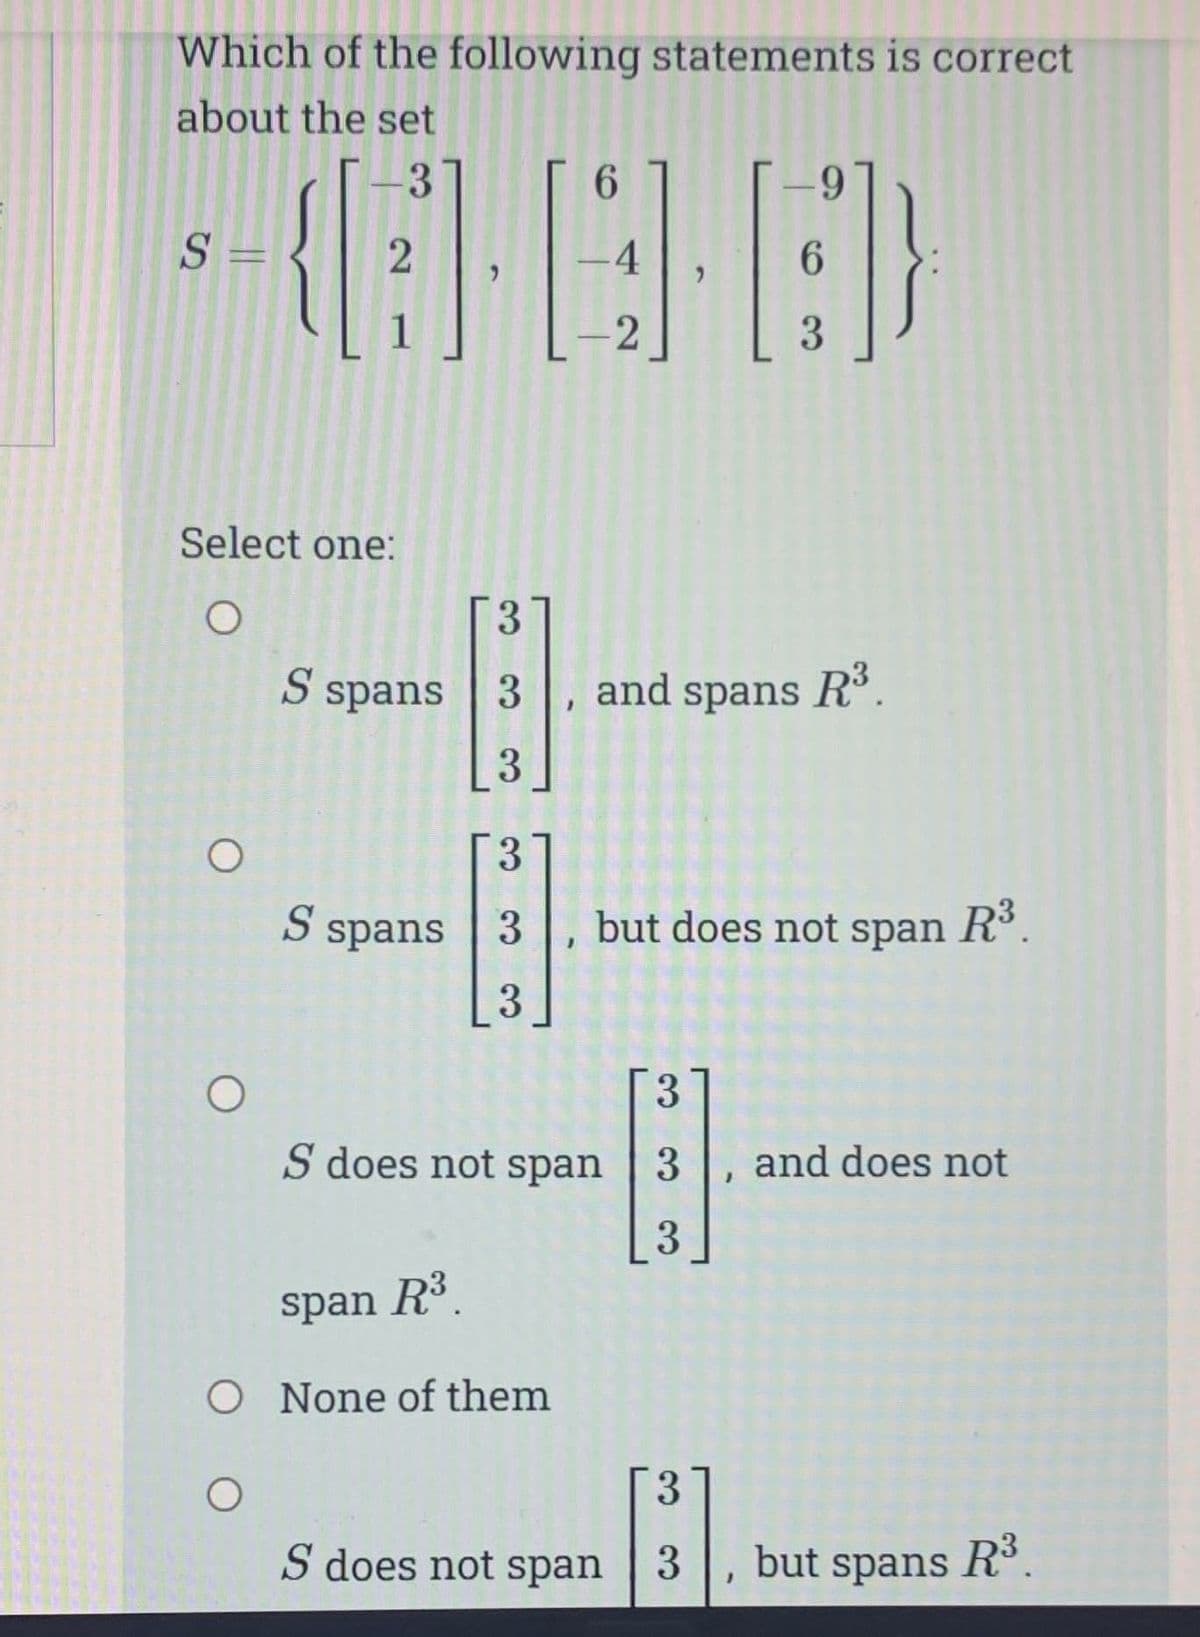 Which of the following statements is correct
about the set
-3
S =
O
6
(88)
-4
2
O
2
Select one:
O
1
3
S spans 3
3
3
S spans 3, and spans R³.
3
S does not span
span R³.
O None of them
O
9
but does not span R³.
3
S does not span 3
6
J
3
3
El
3 and does not
3
}
but spans
R³.